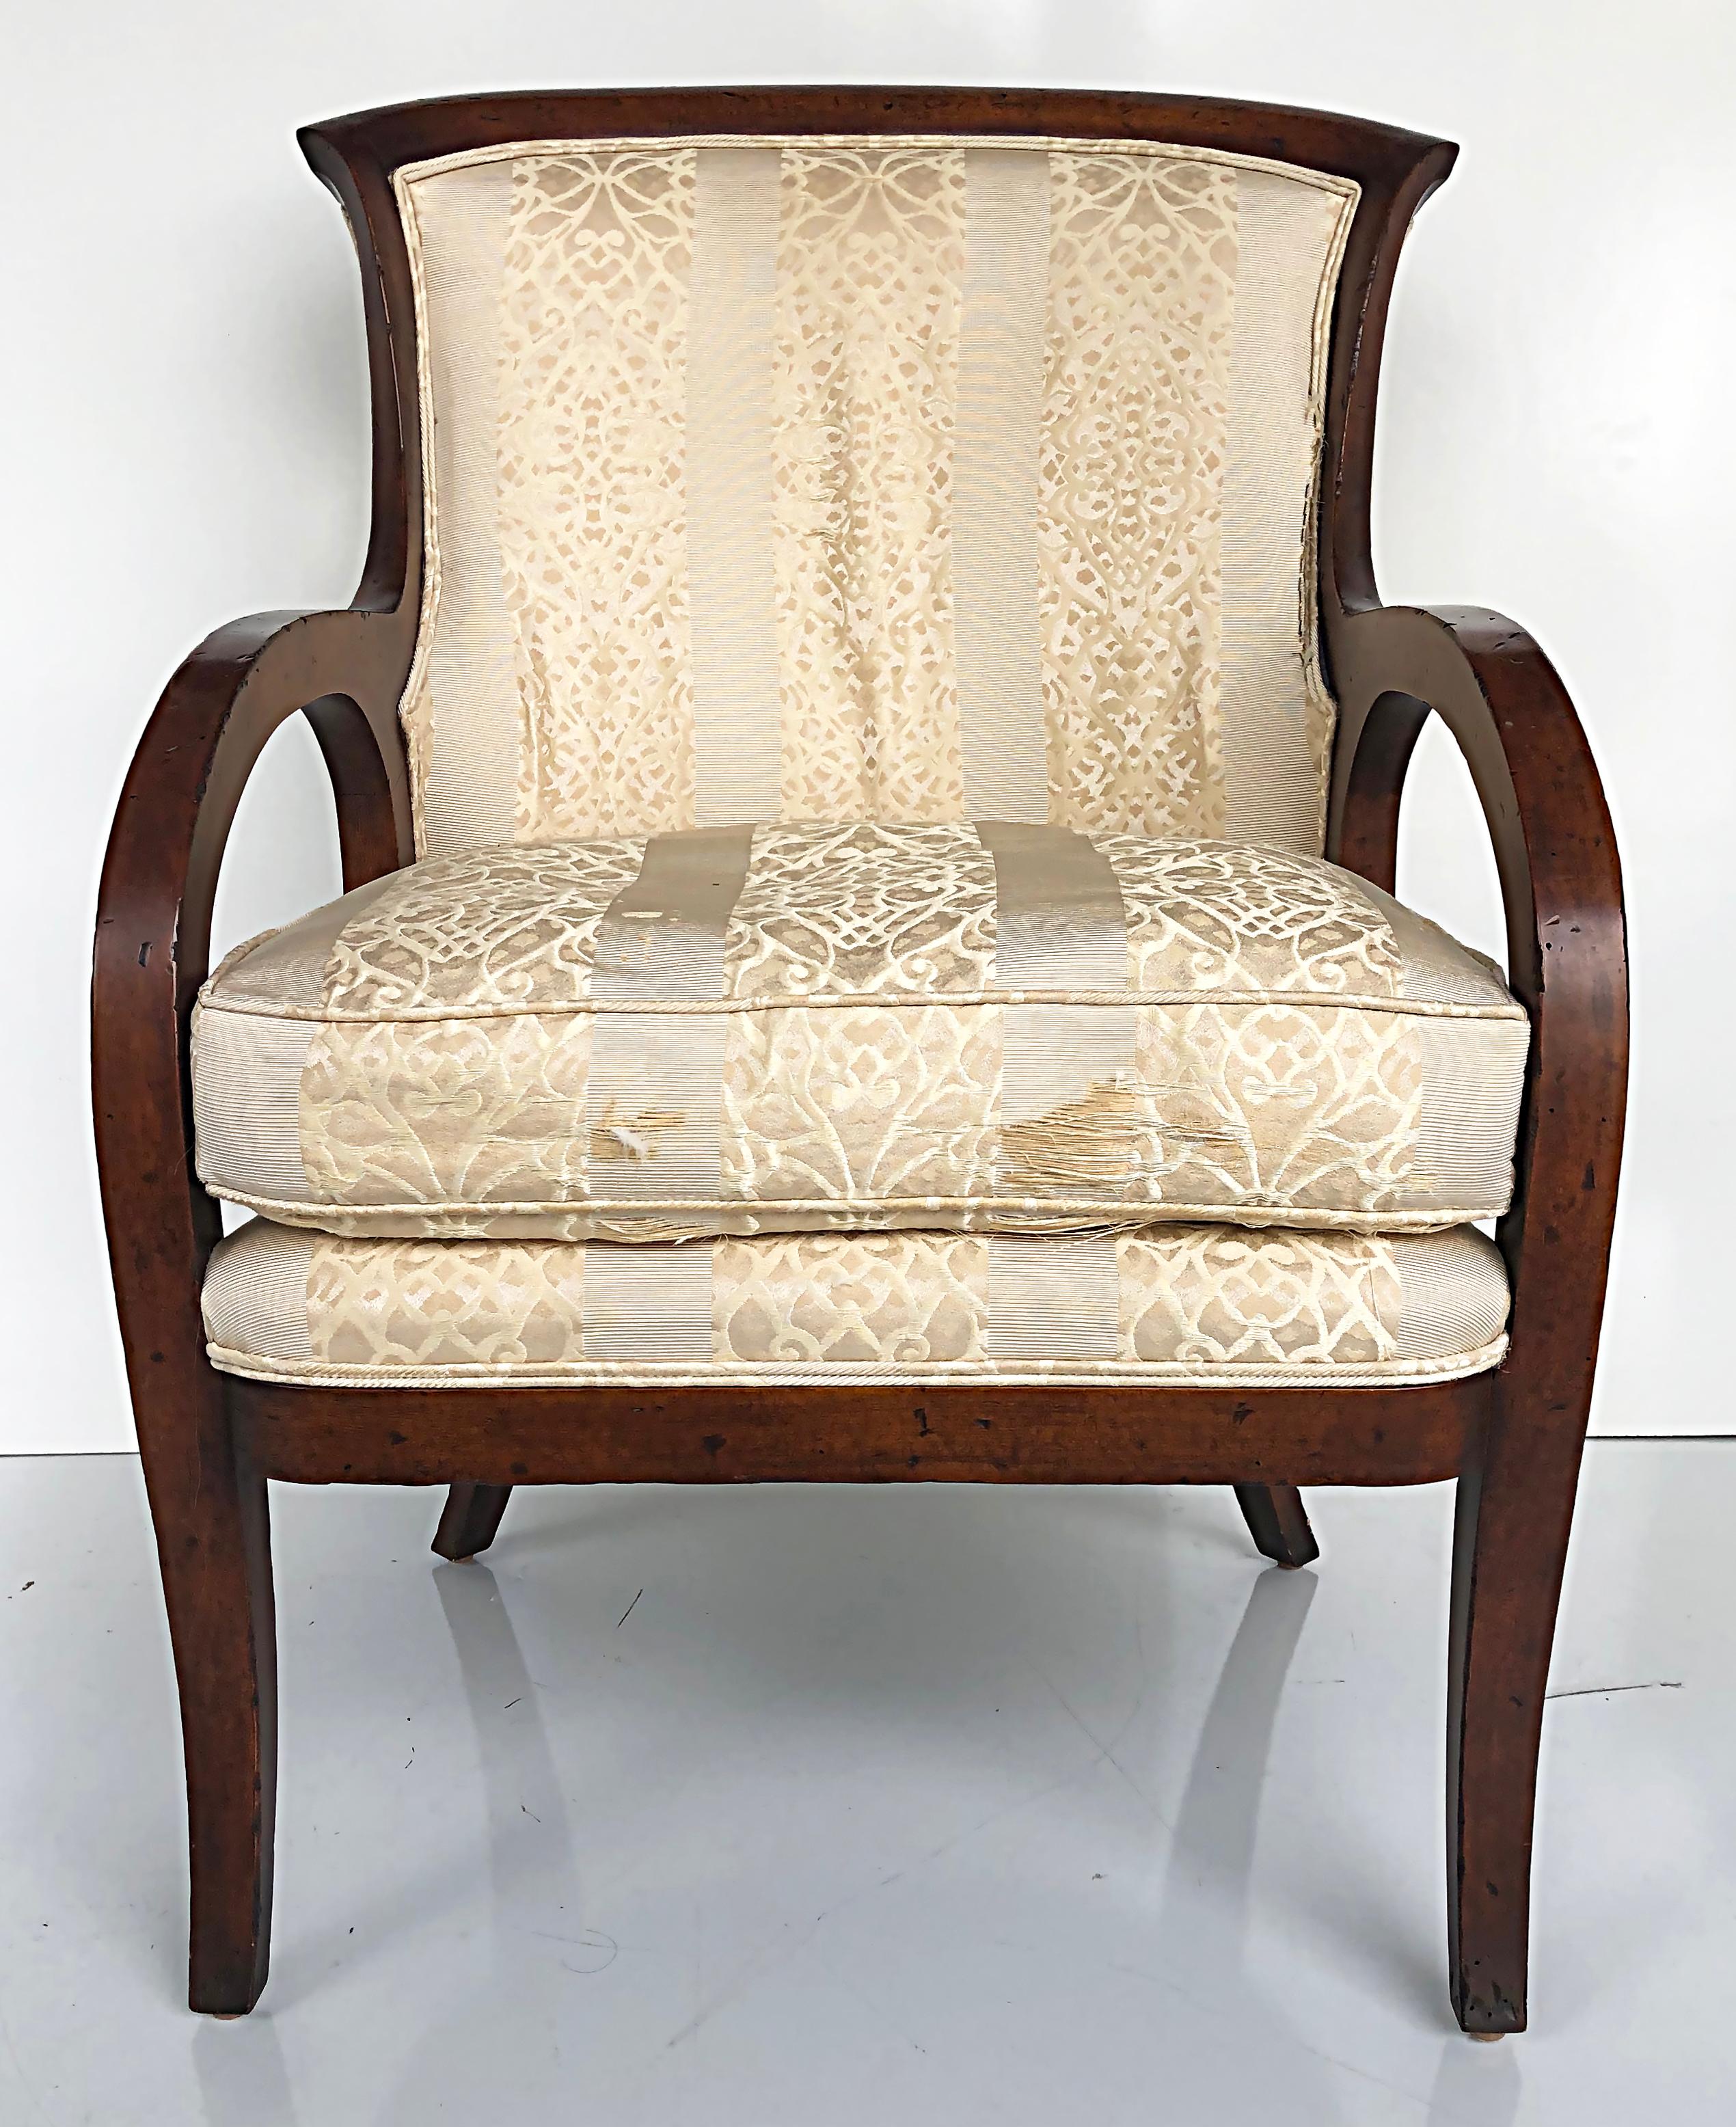 Elegant Down Club Chairs, Hancock and Moore Attributed, Require Upholstering

Offered for sale is a pair of late 20th-century fine quality club chairs with down-filled cushions. The pair is attributed to Hancock & Moore. The fabric is original and